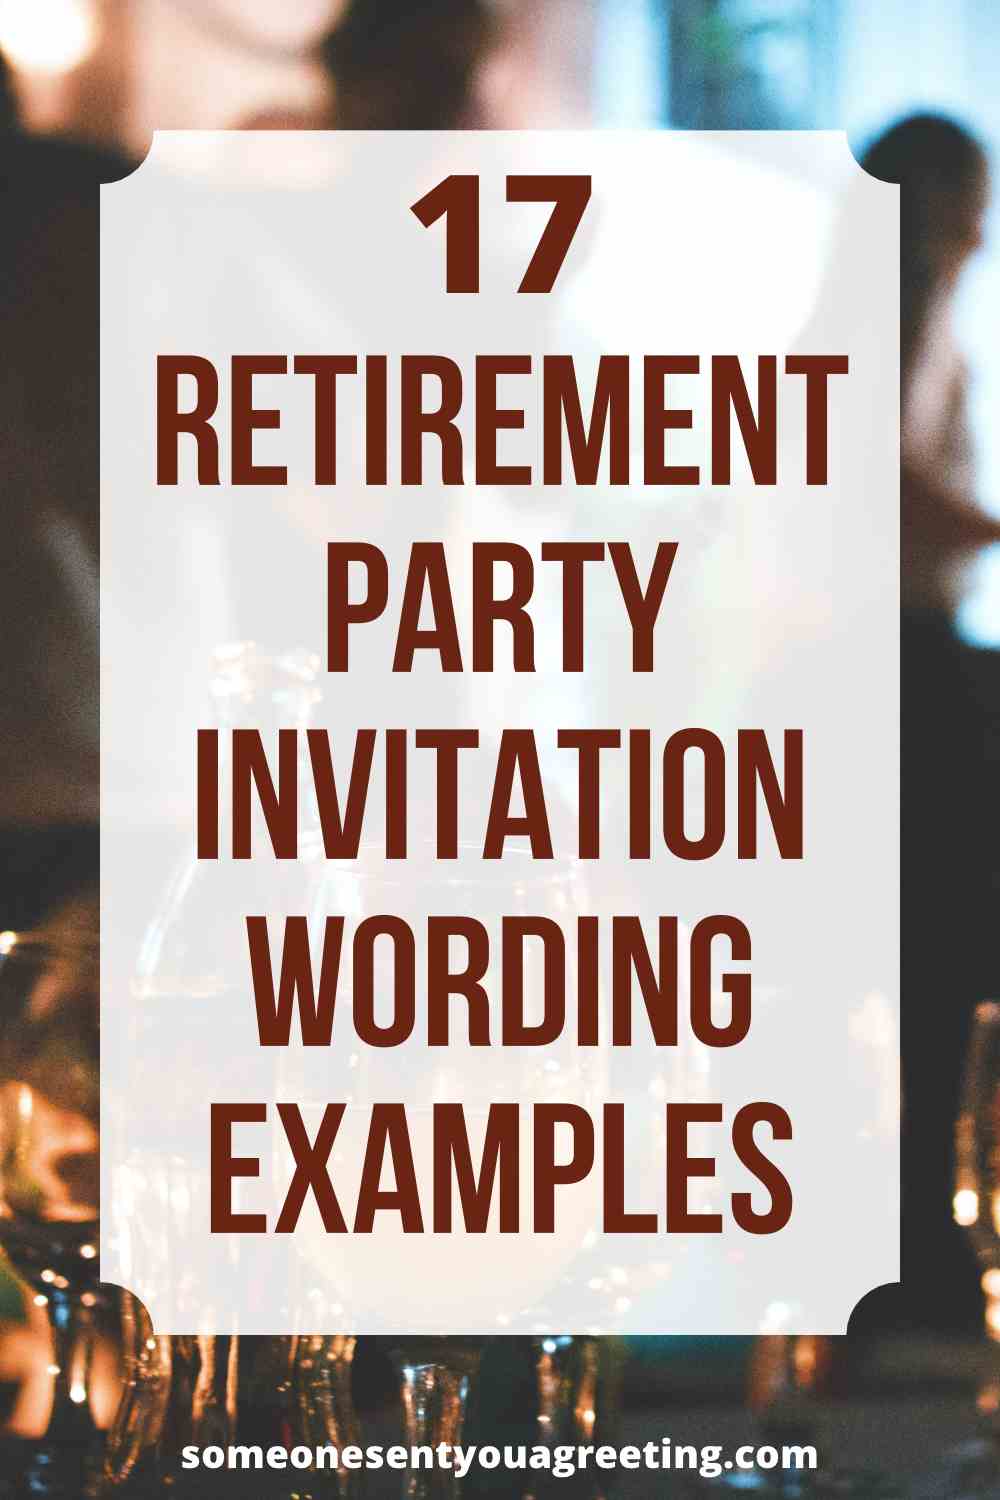 17 Retirement Party Invitation Wording Examples - Someone Sent You A